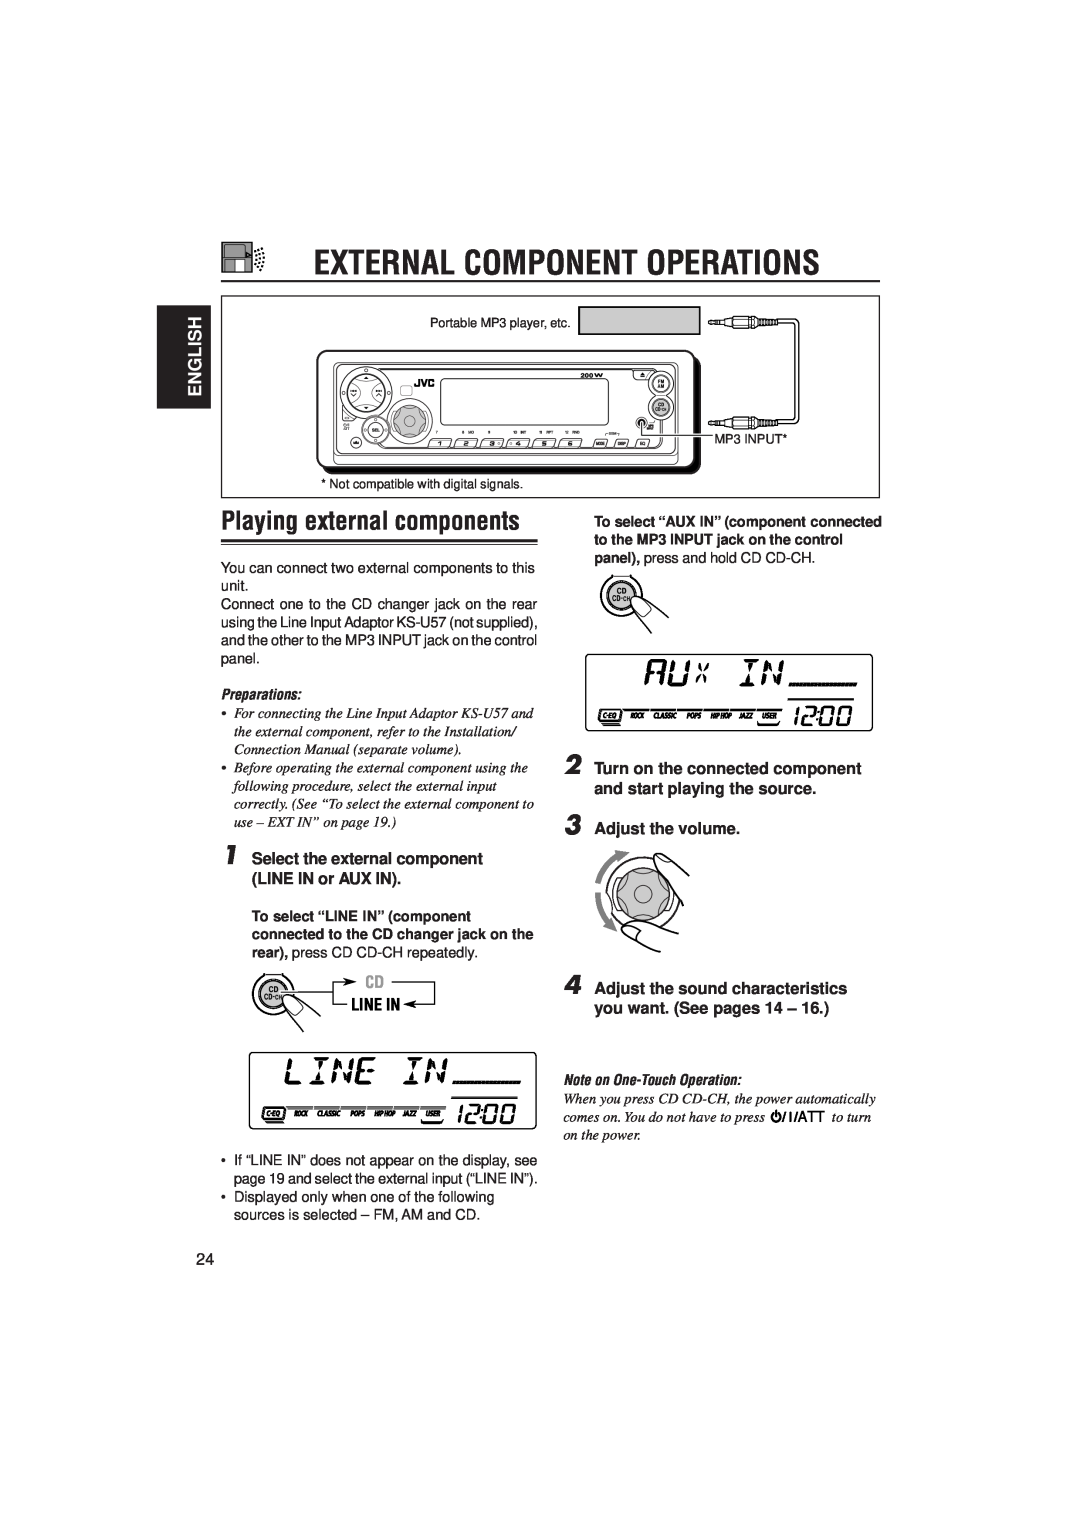 JVC KD-SX8250 External Component Operations, Playing external components, Select the external component LINE IN or AUX IN 